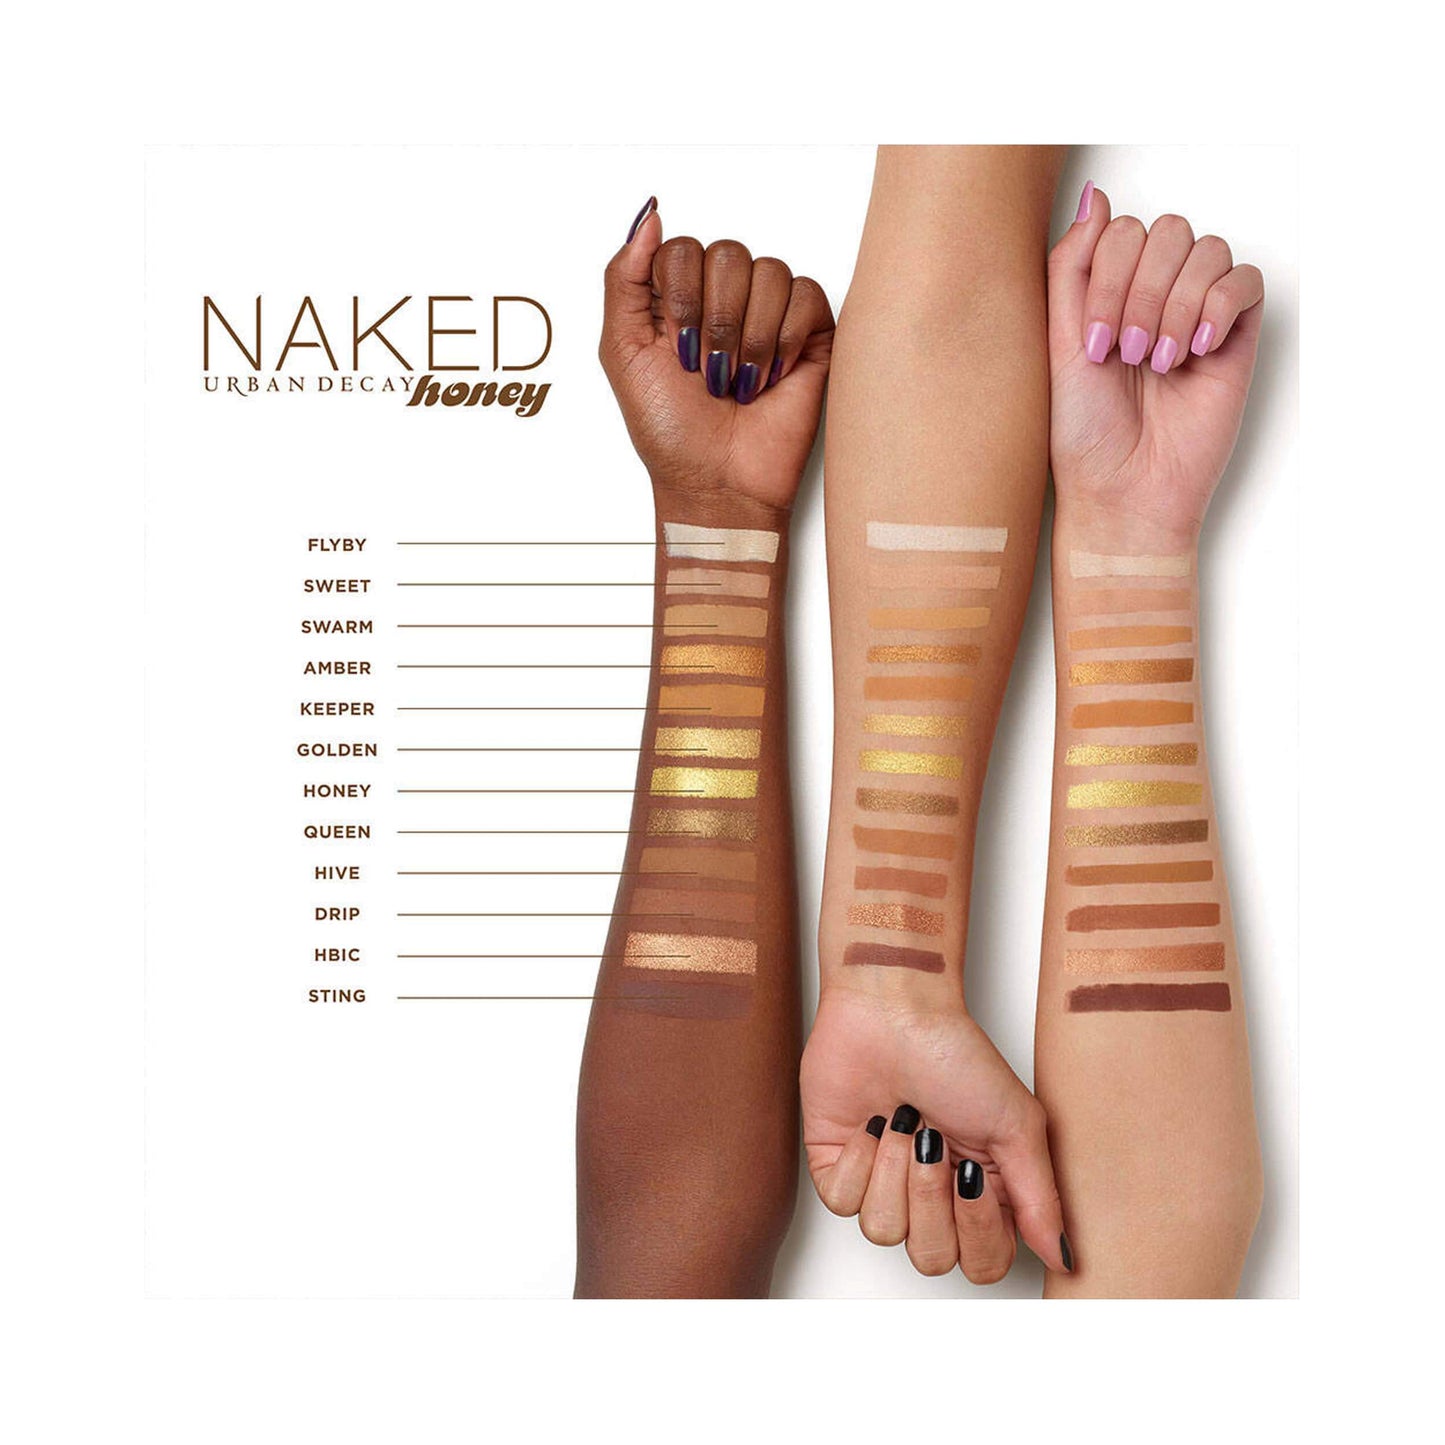 Urban Decay Naked Honey Eyeshadow Palette Swatches